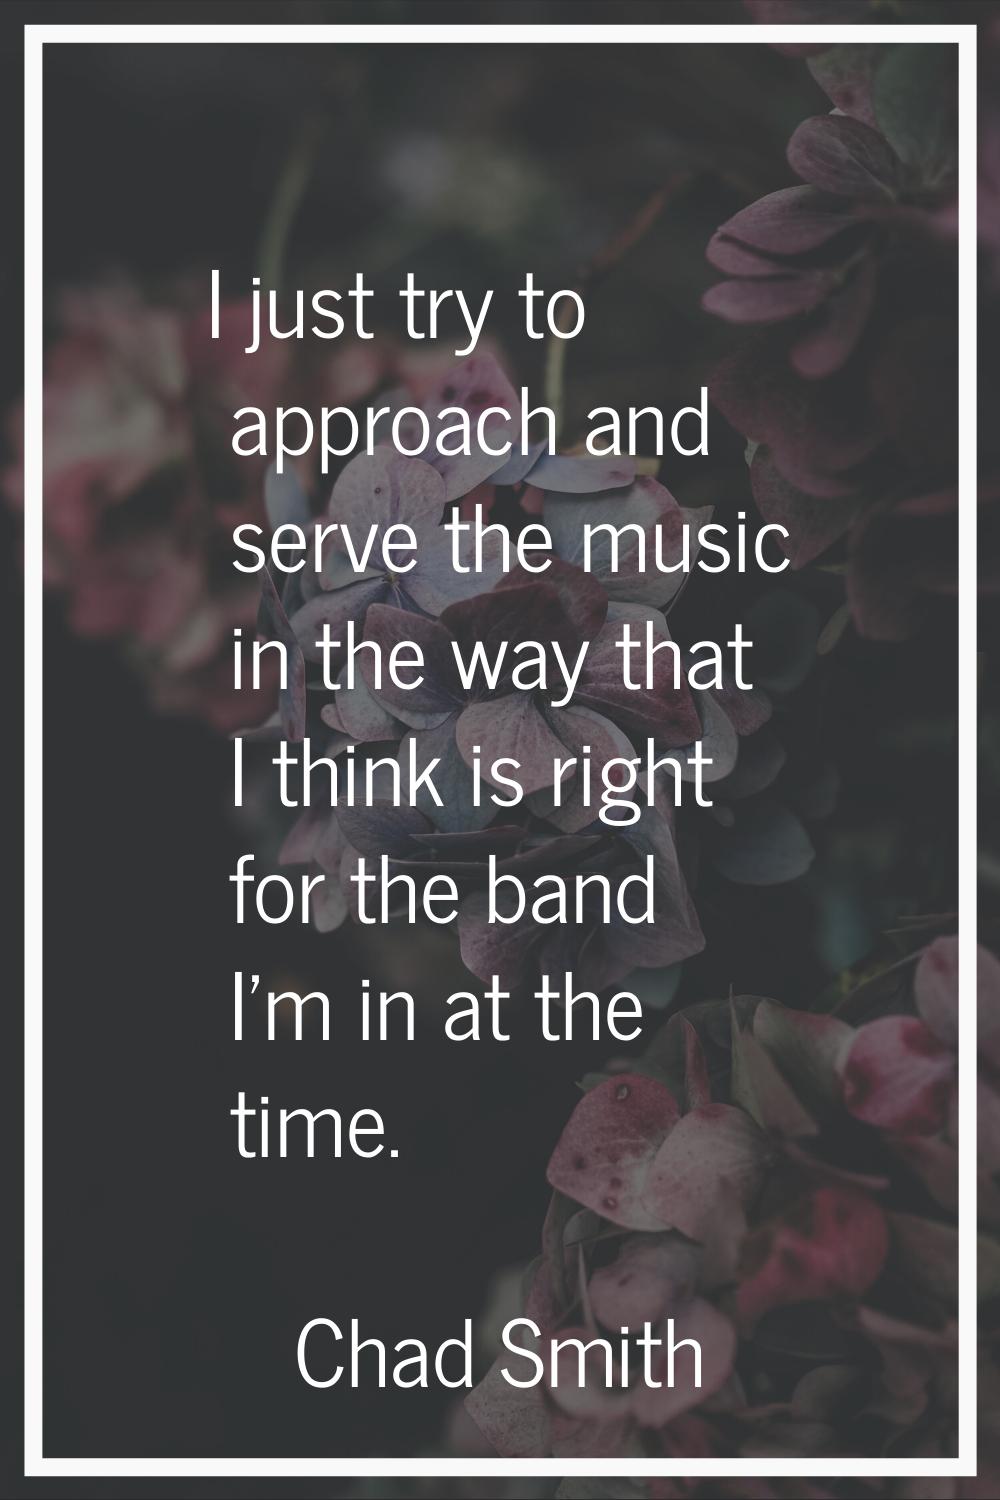 I just try to approach and serve the music in the way that I think is right for the band I'm in at 